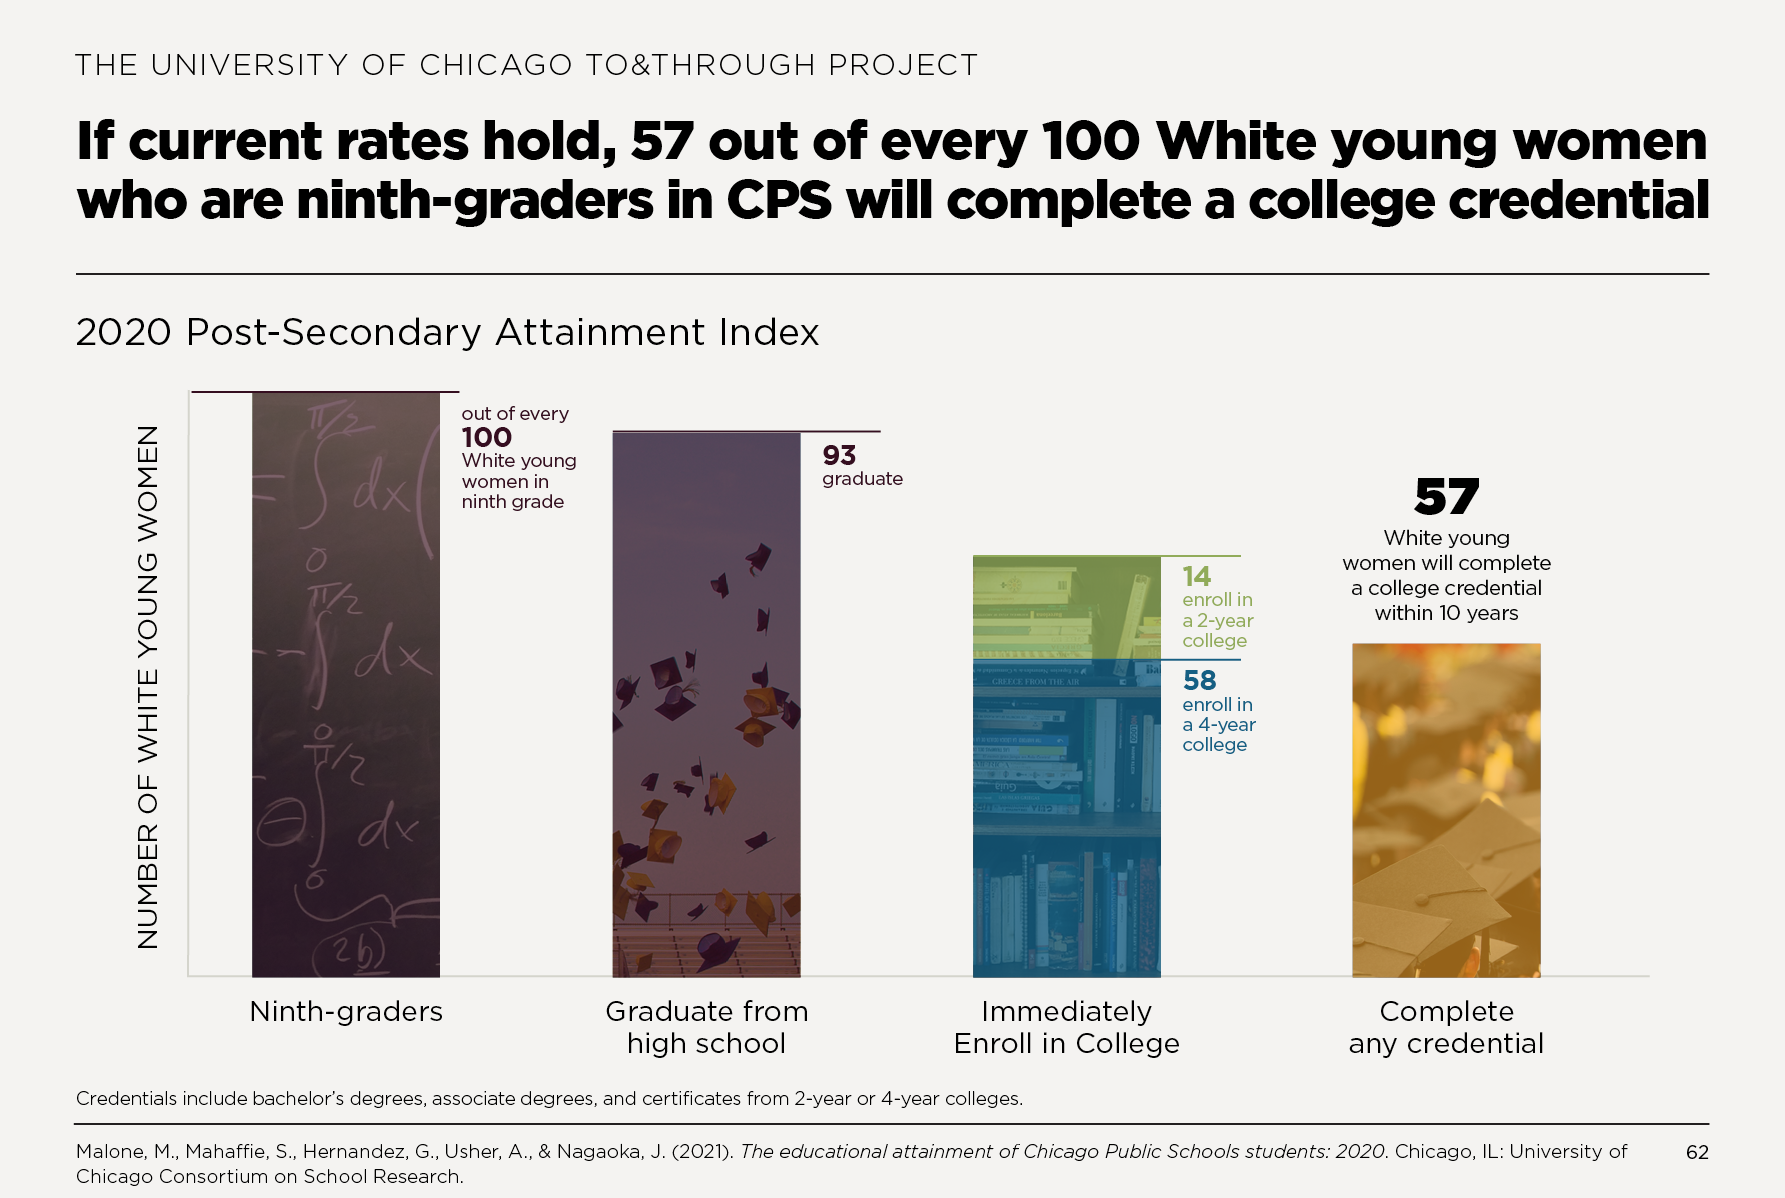 If current rates hold, 57 out of every 100 White young women who are ninth-graders in CPS will complete a college credential within 10 years